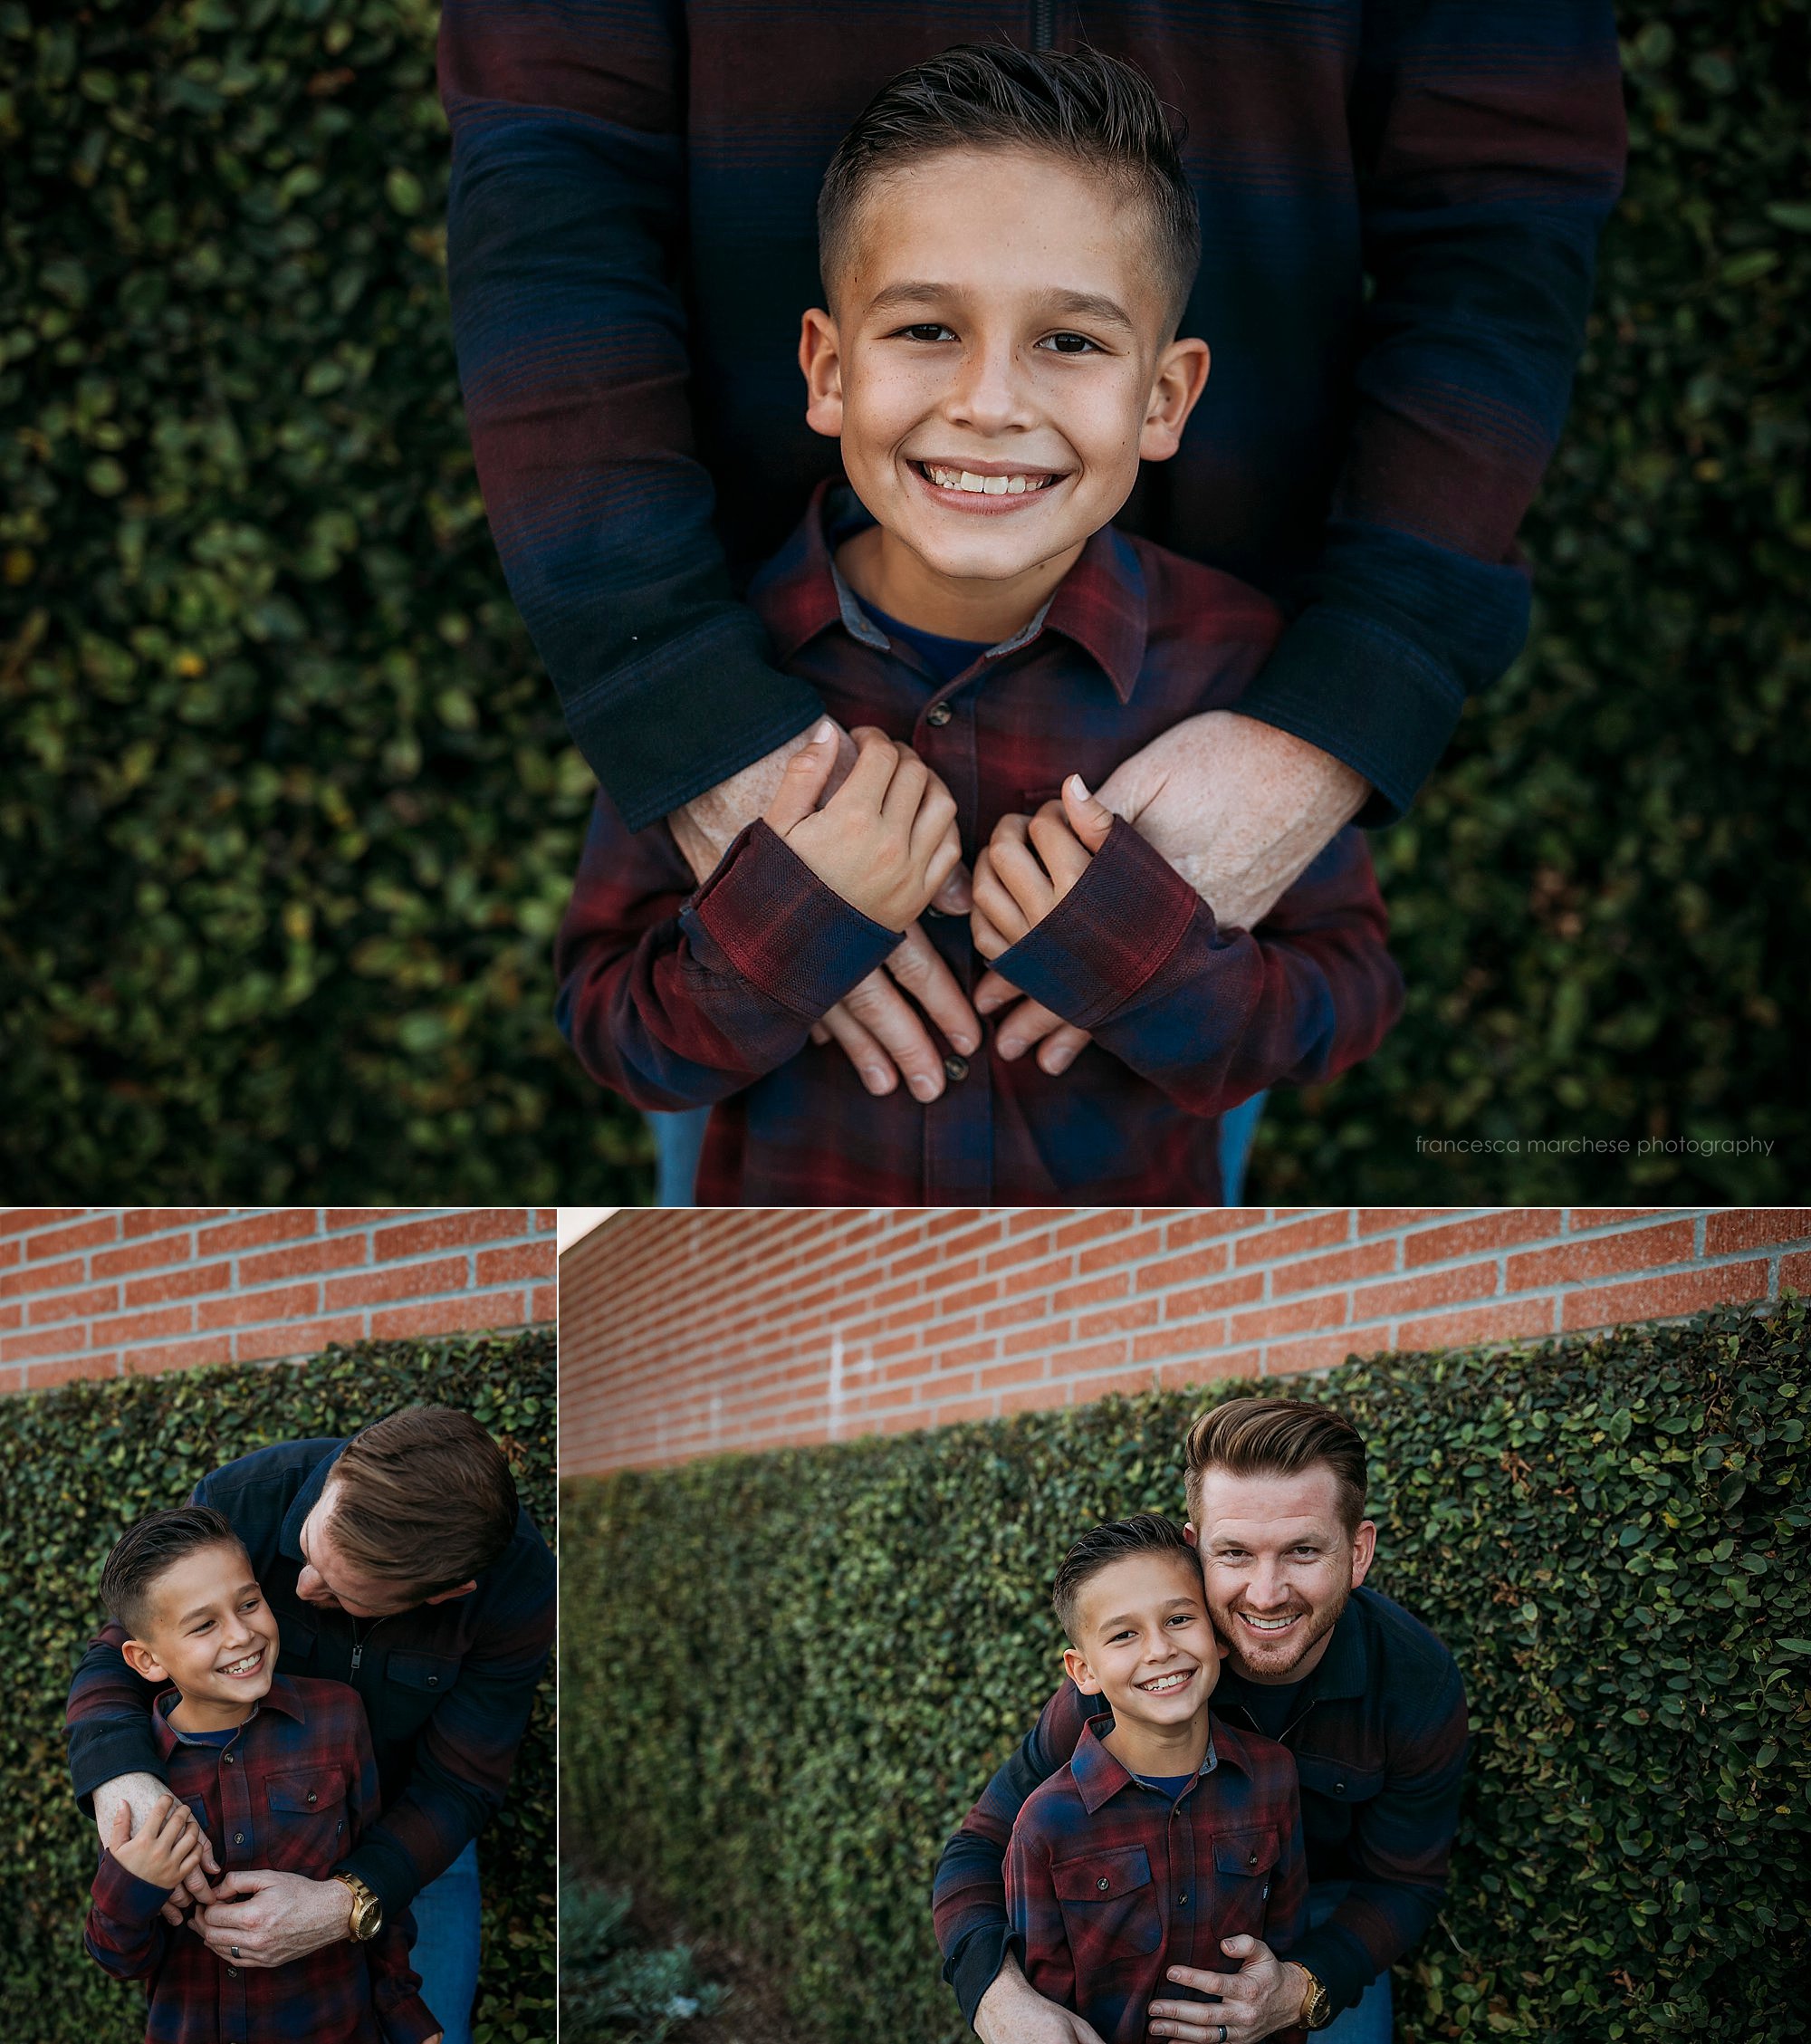 Thomas Family Francesca Marchese Photography Long Beach Orange County family photographer father and son